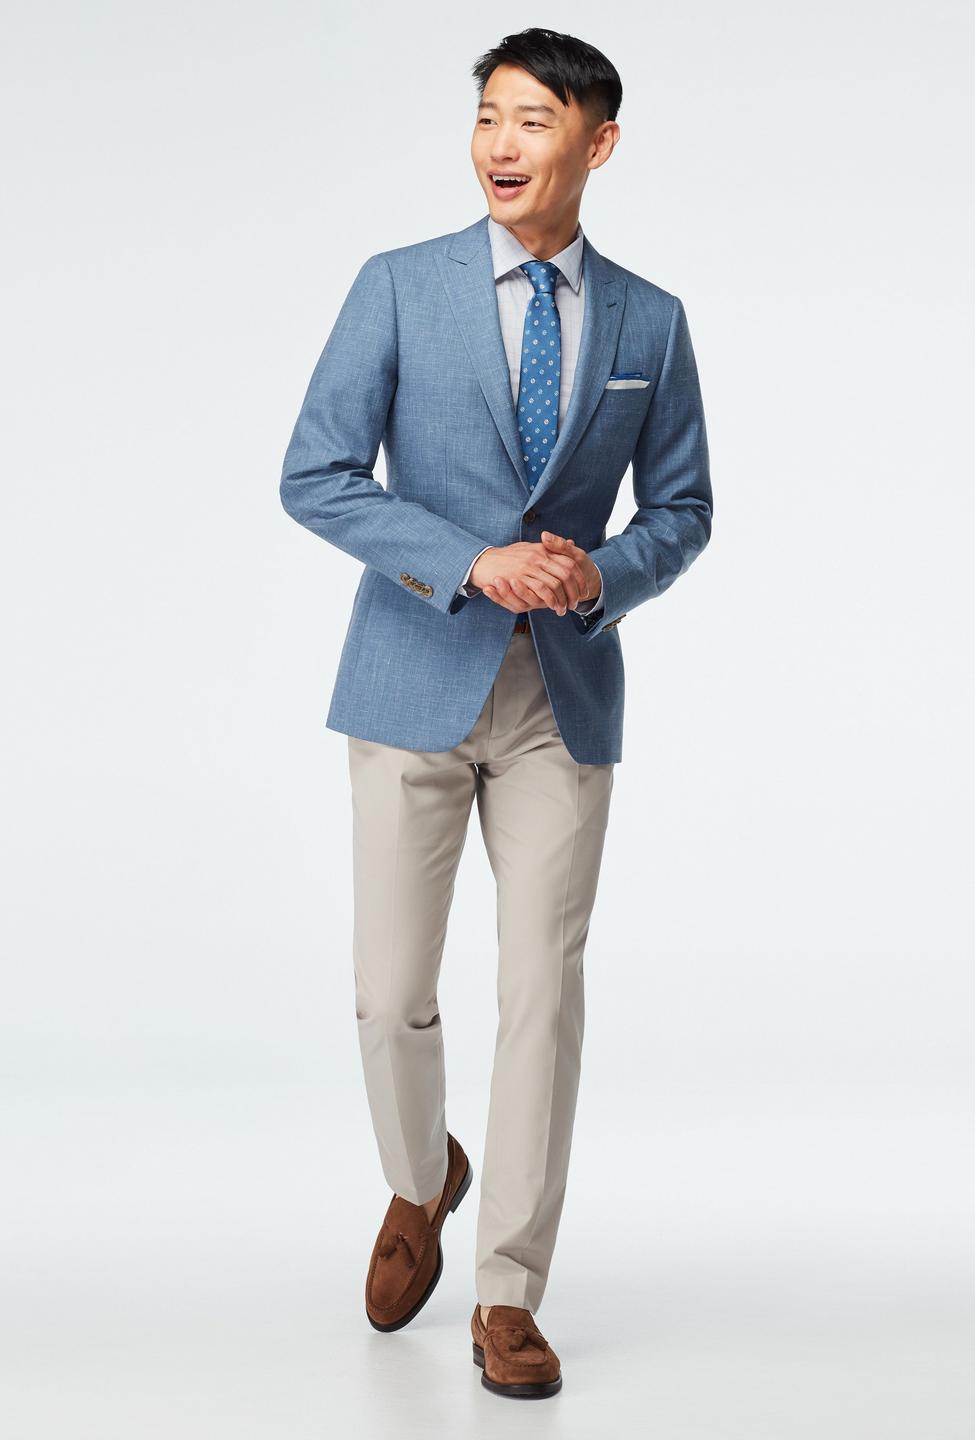 Blue blazer - Stockport Solid Design from Seasonal Indochino Collection